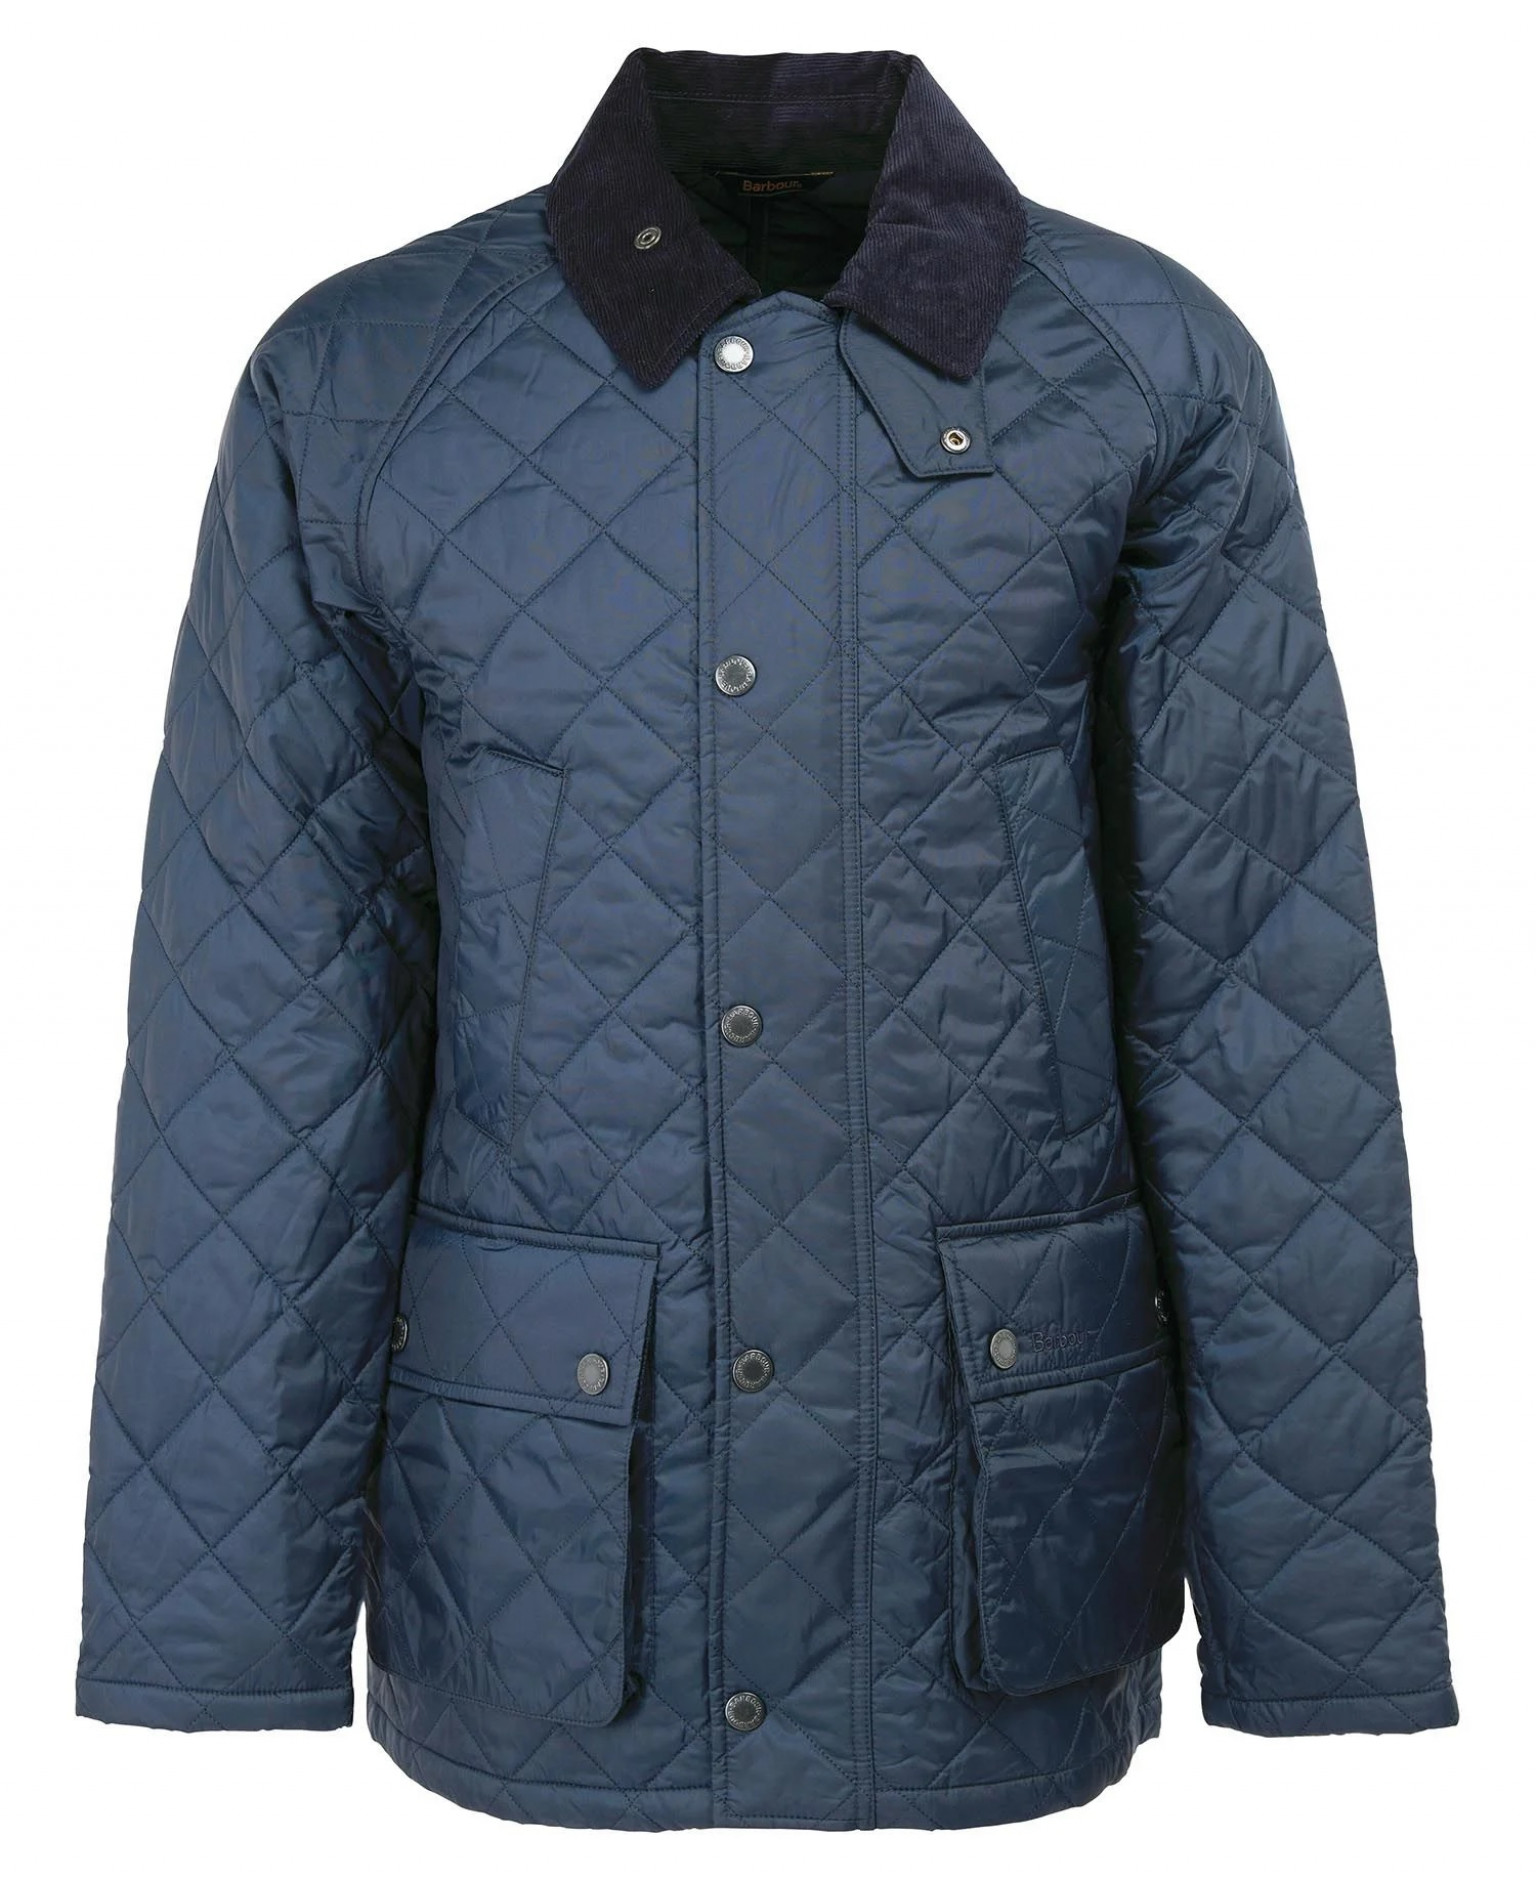 Barbour Ashby Quilt Navy